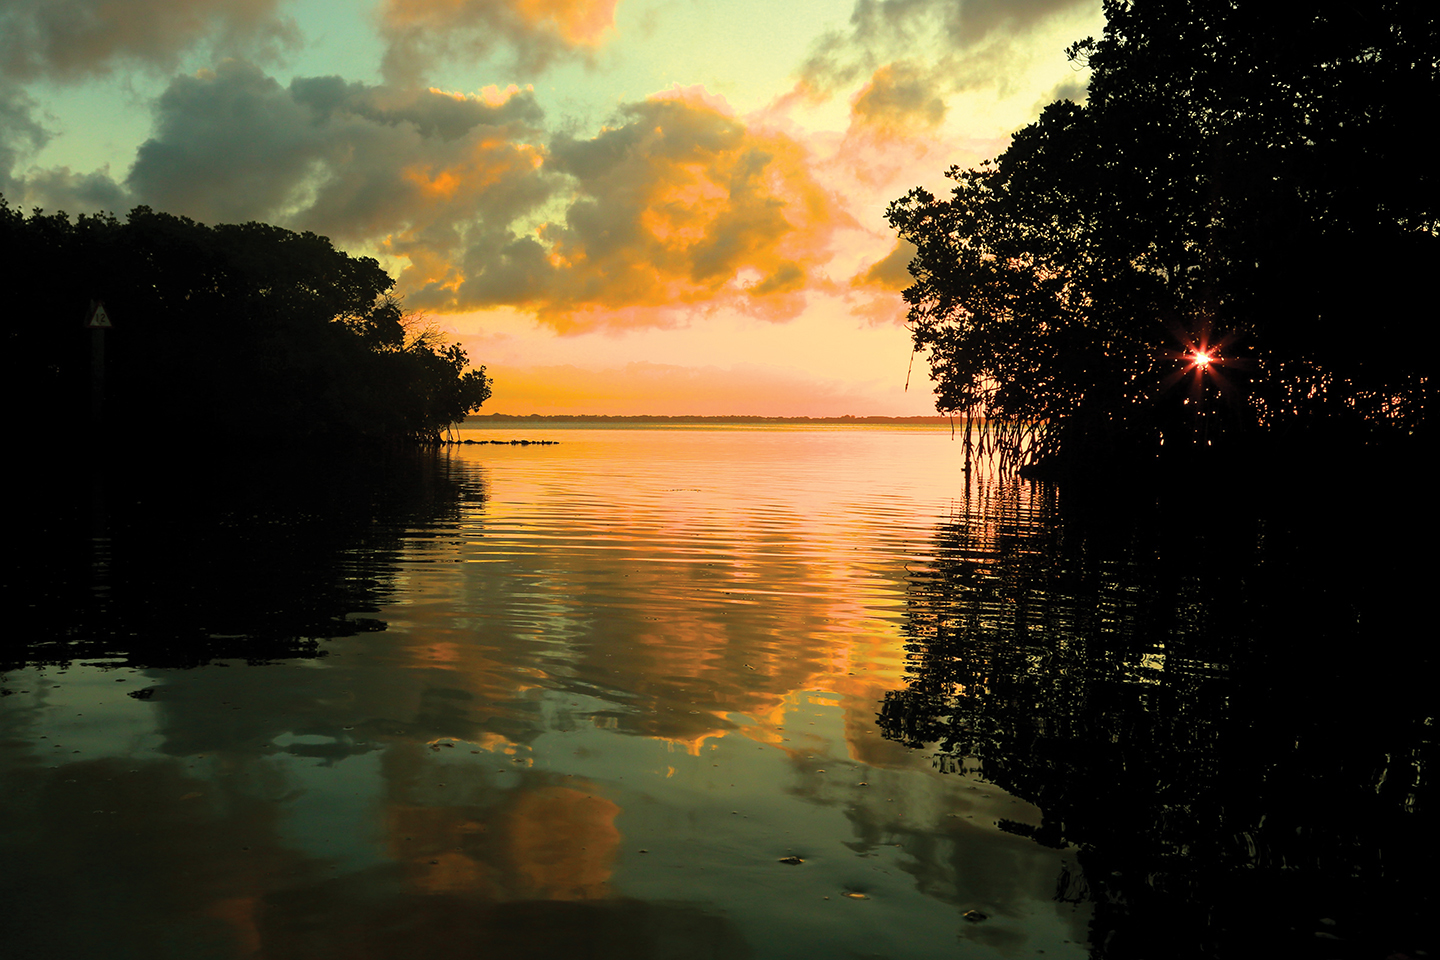 John Caviglia captured this sunrise shot from a kayak on a canal off Longboat Key.